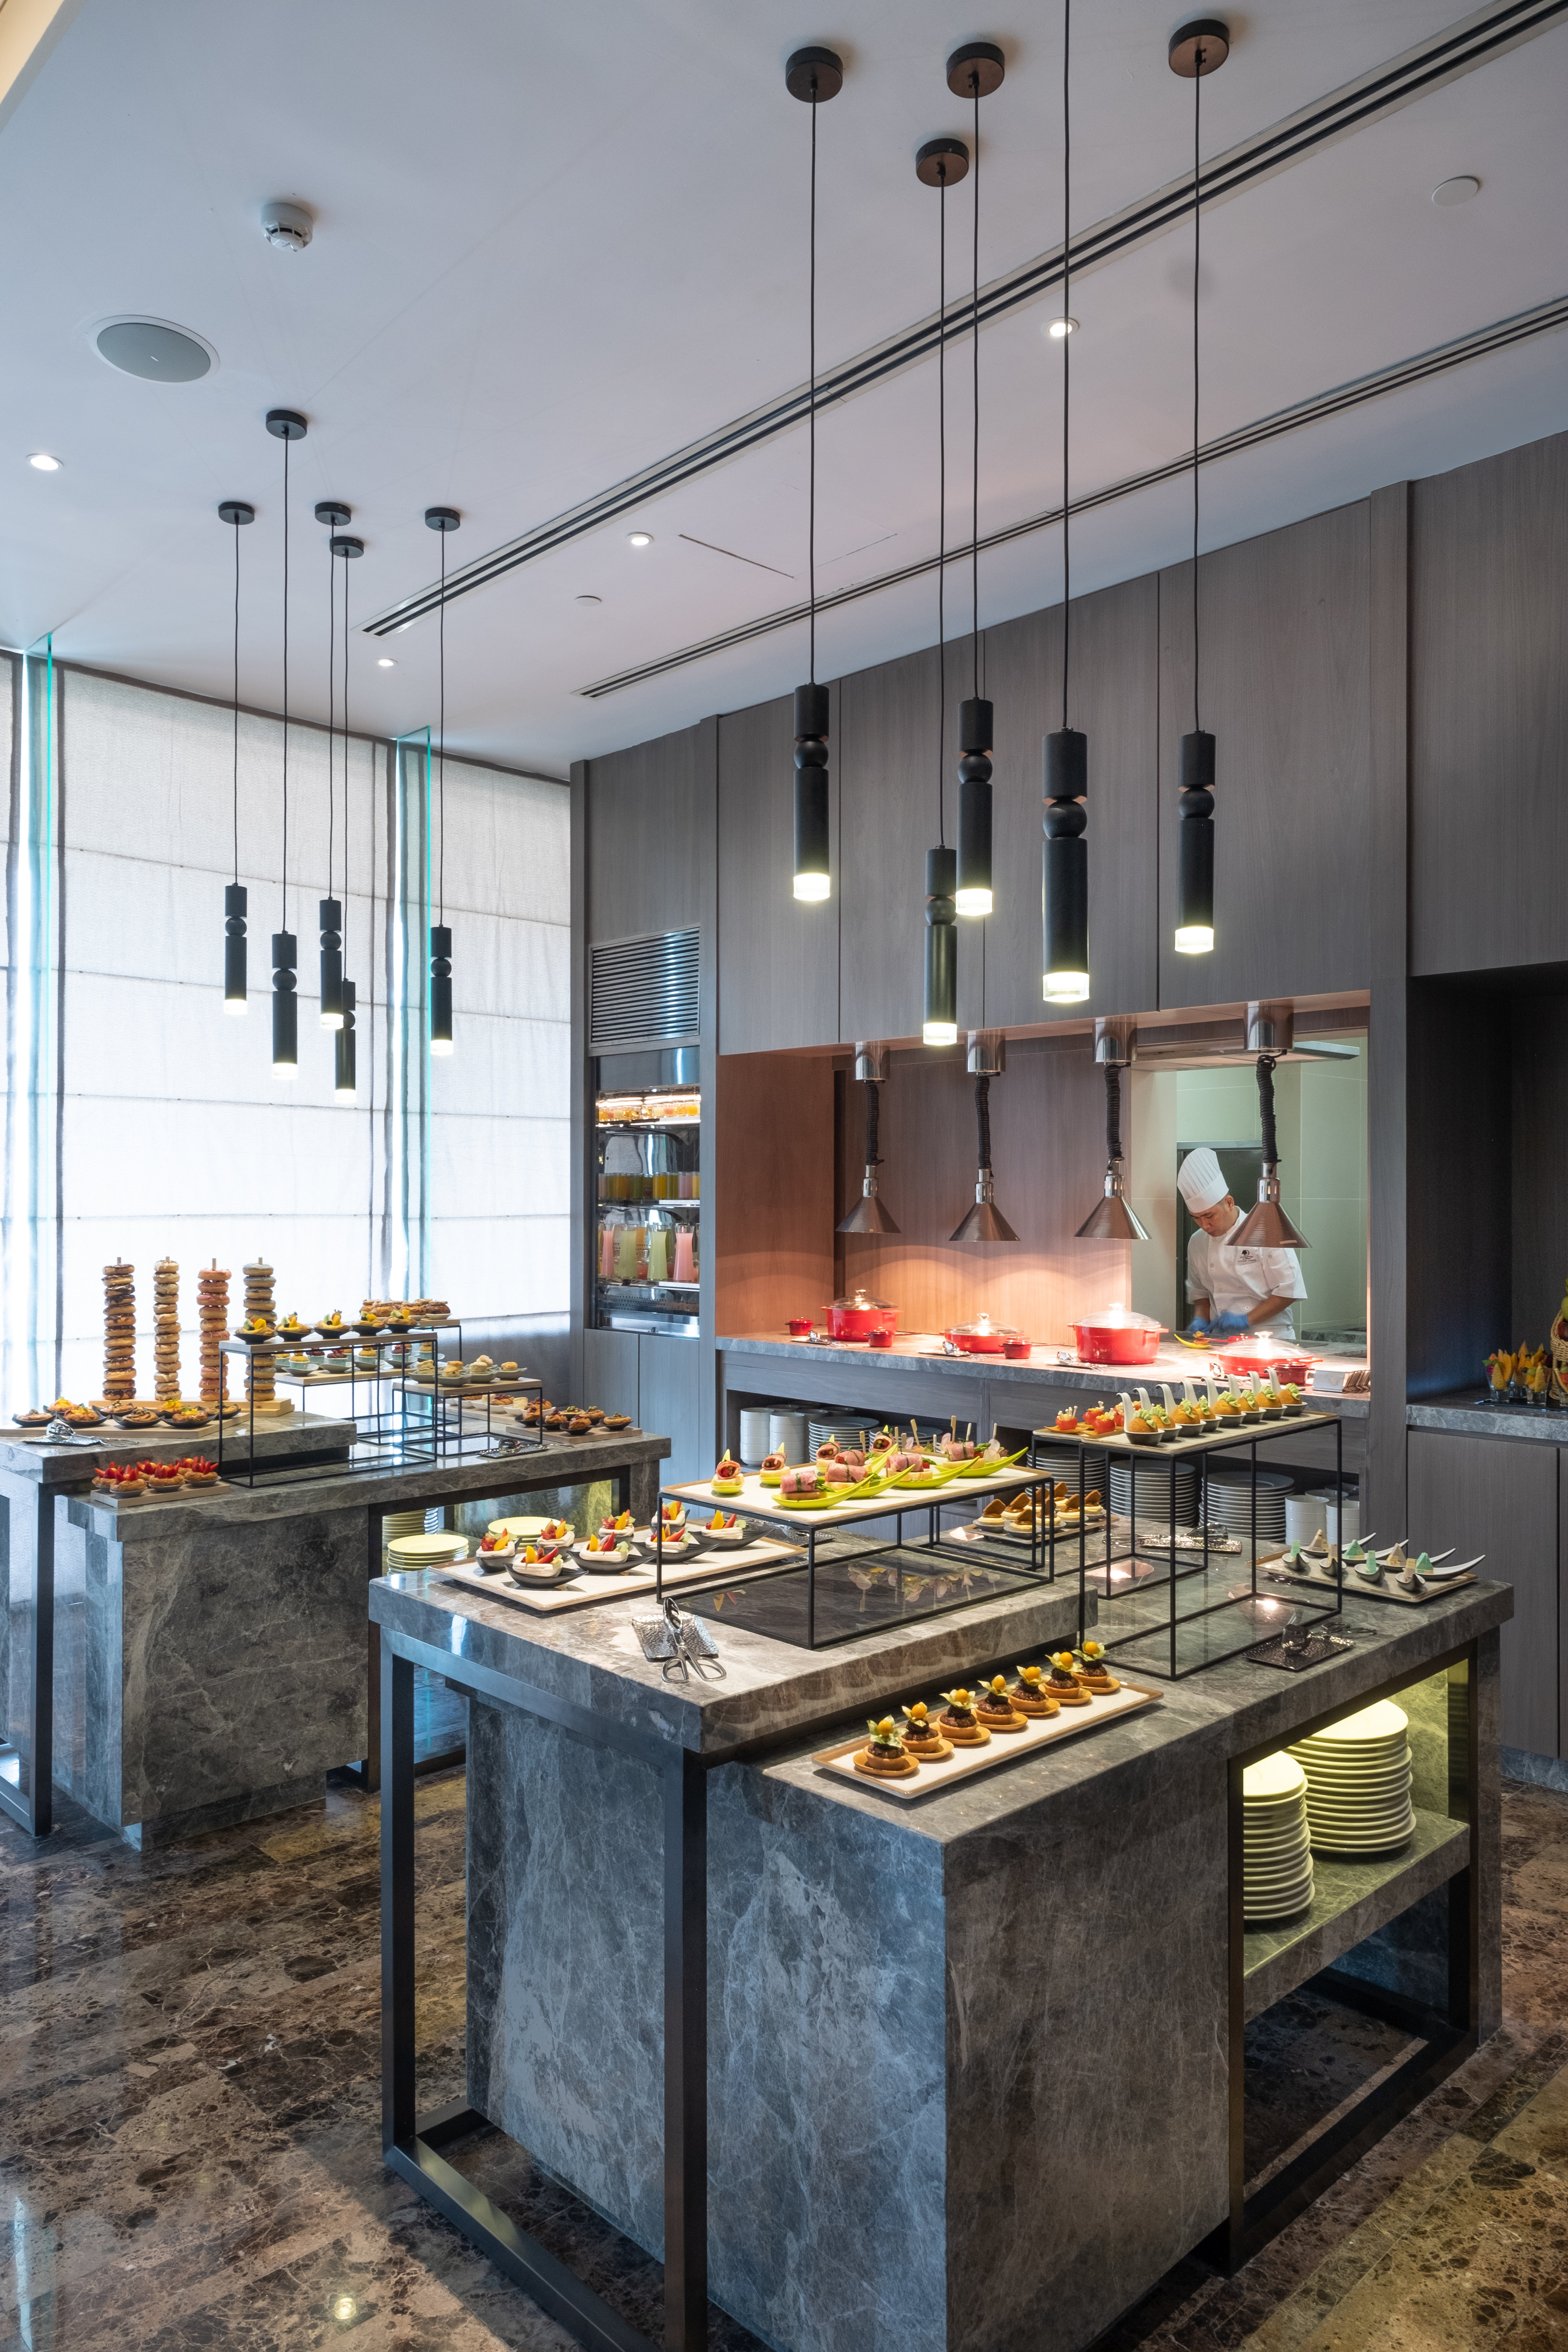 Executive lounge buffet and food area with chef